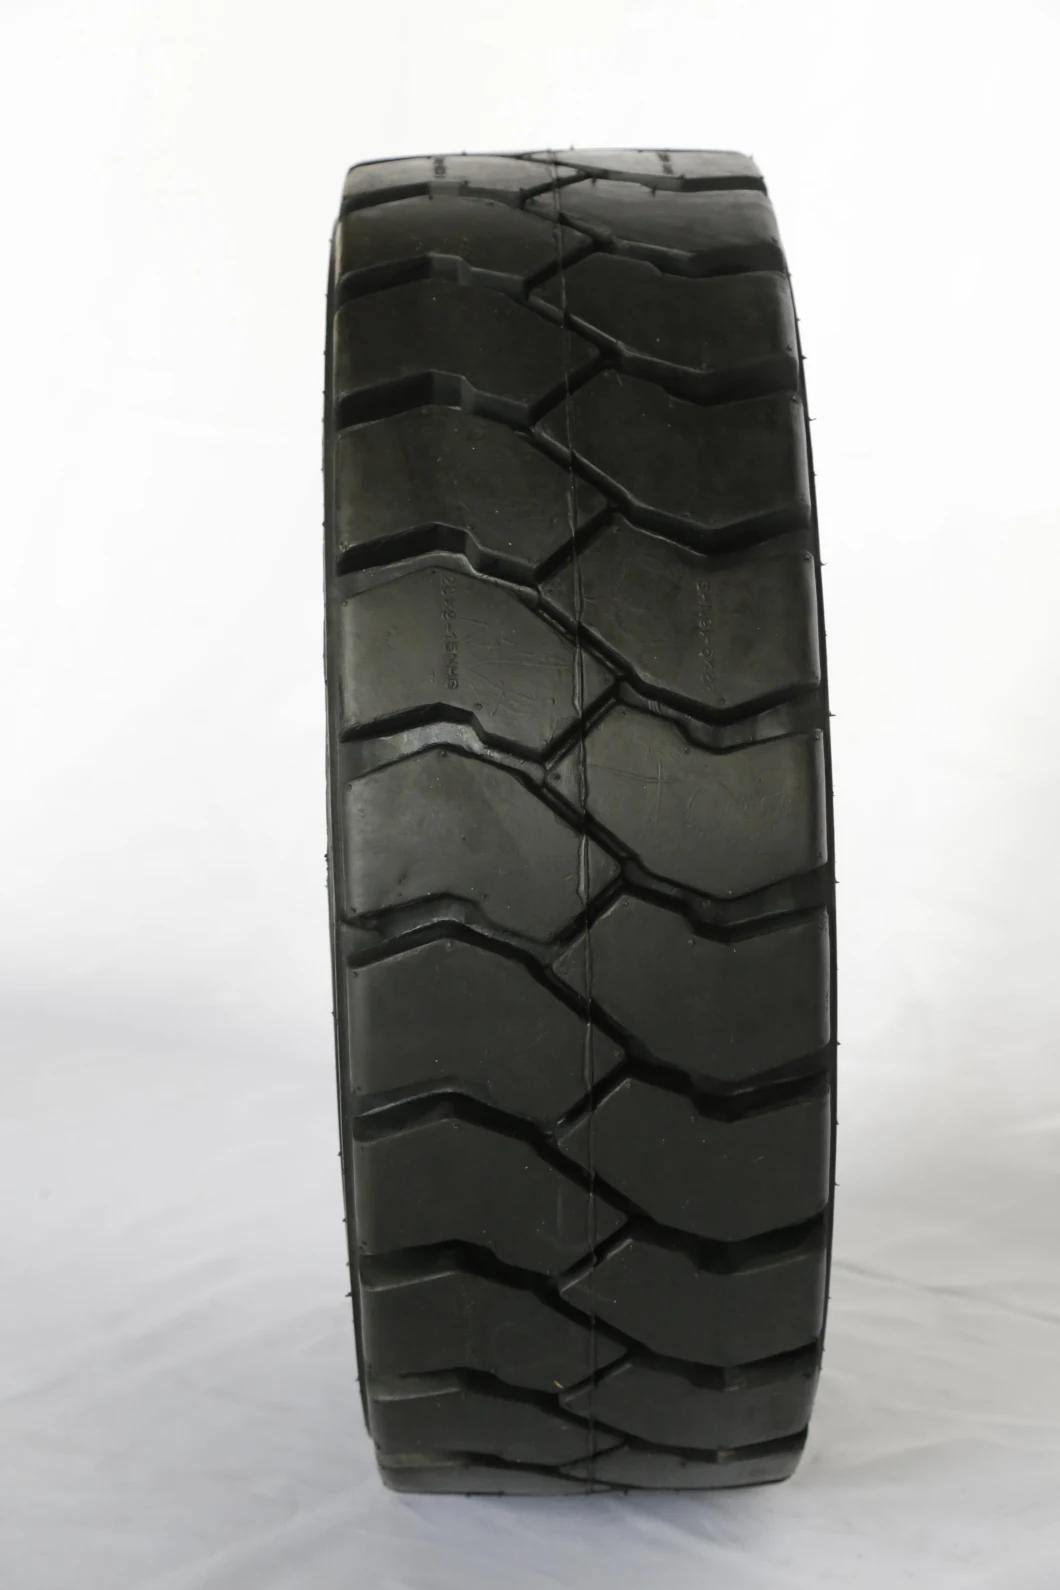 Germany and Japan Technic Forklift Tire Factory Cheap Price, Forklift Tyre/Tire 750-15